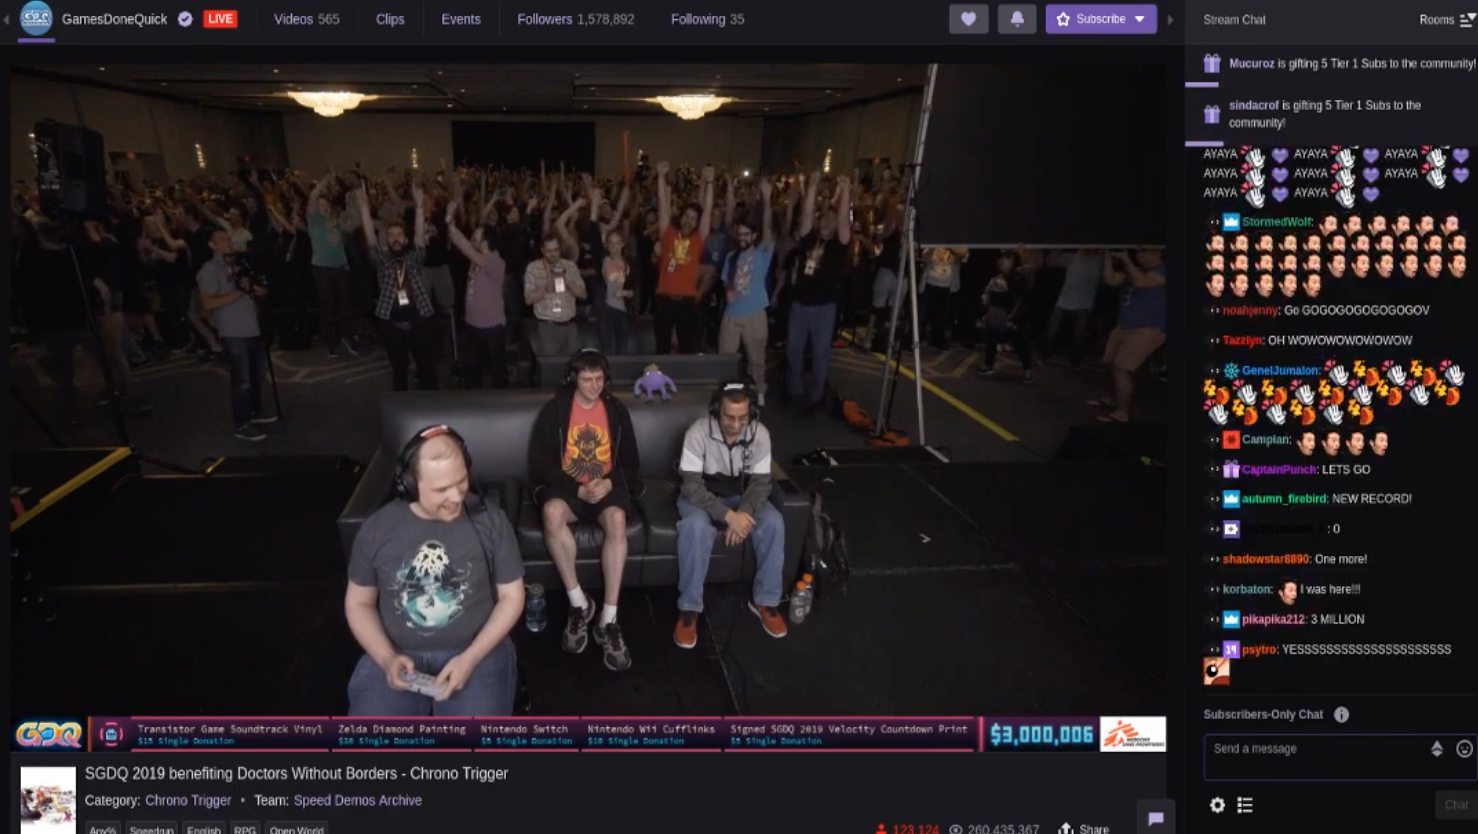 A screenshot of a gaming marathon shows a crowd of people watching behind gamers playing as well as a stream of online comments. 